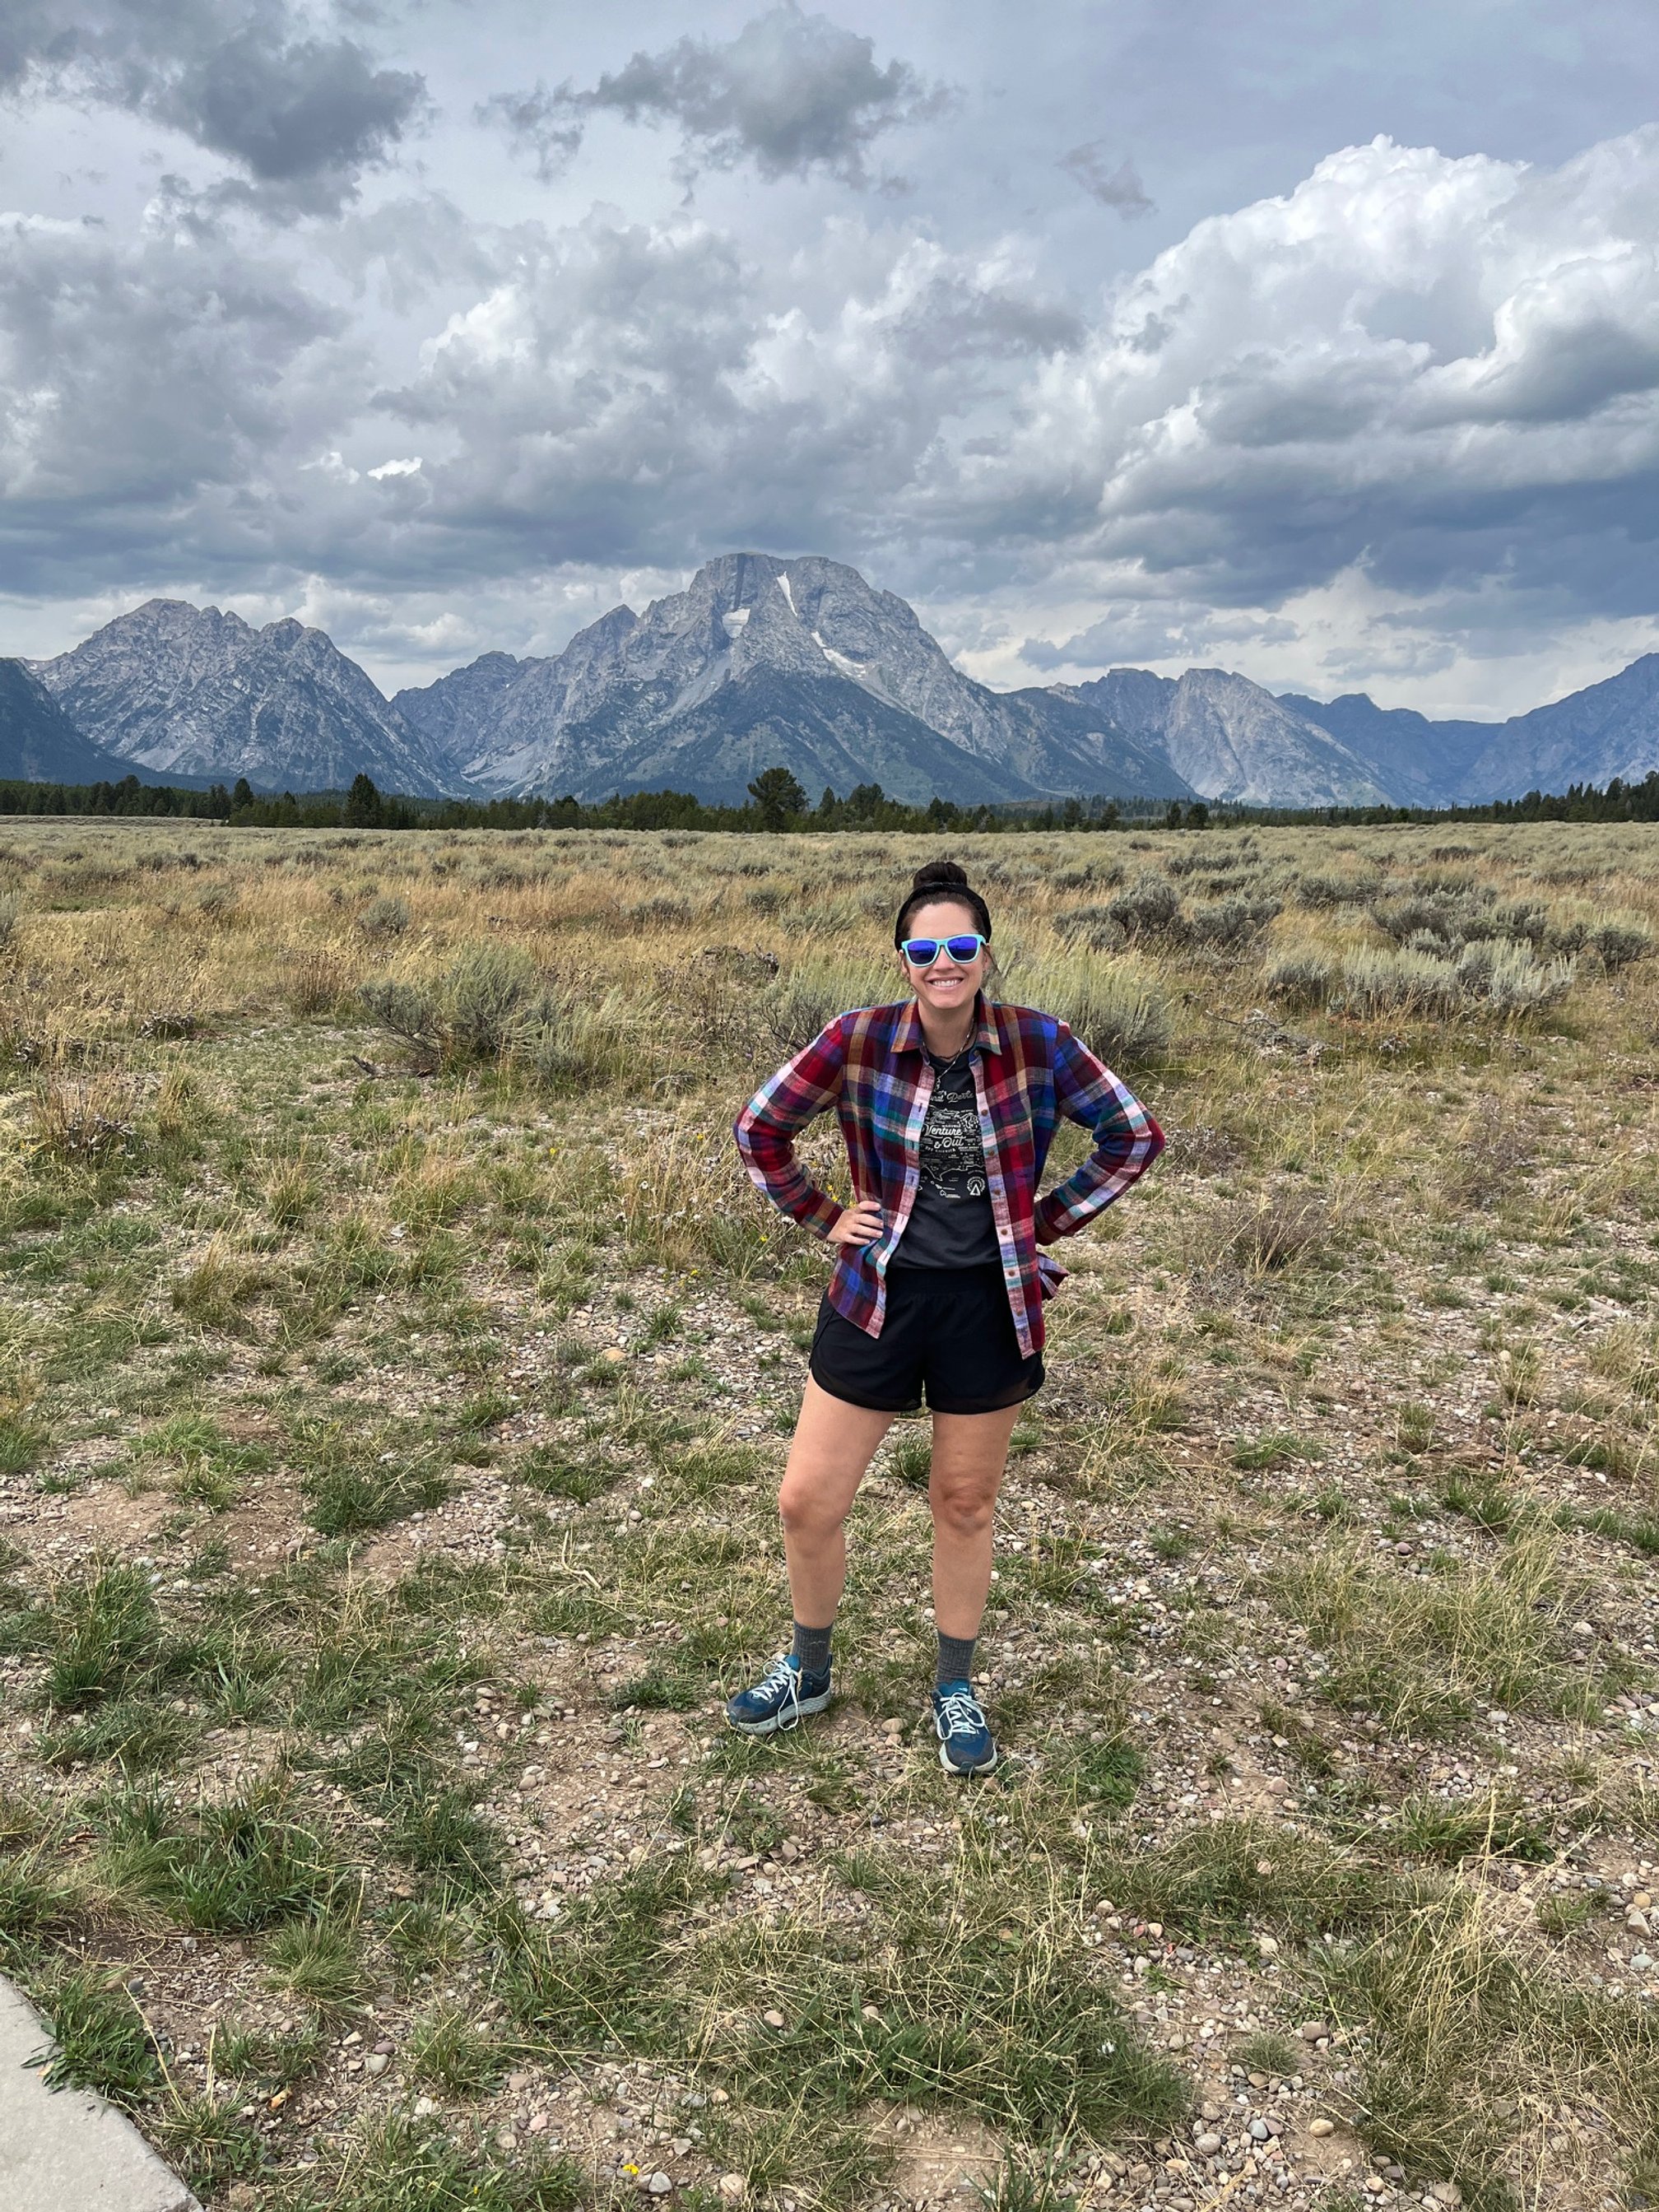 Best Hiking Clothes for Women: Building a Capsule Wardrobe